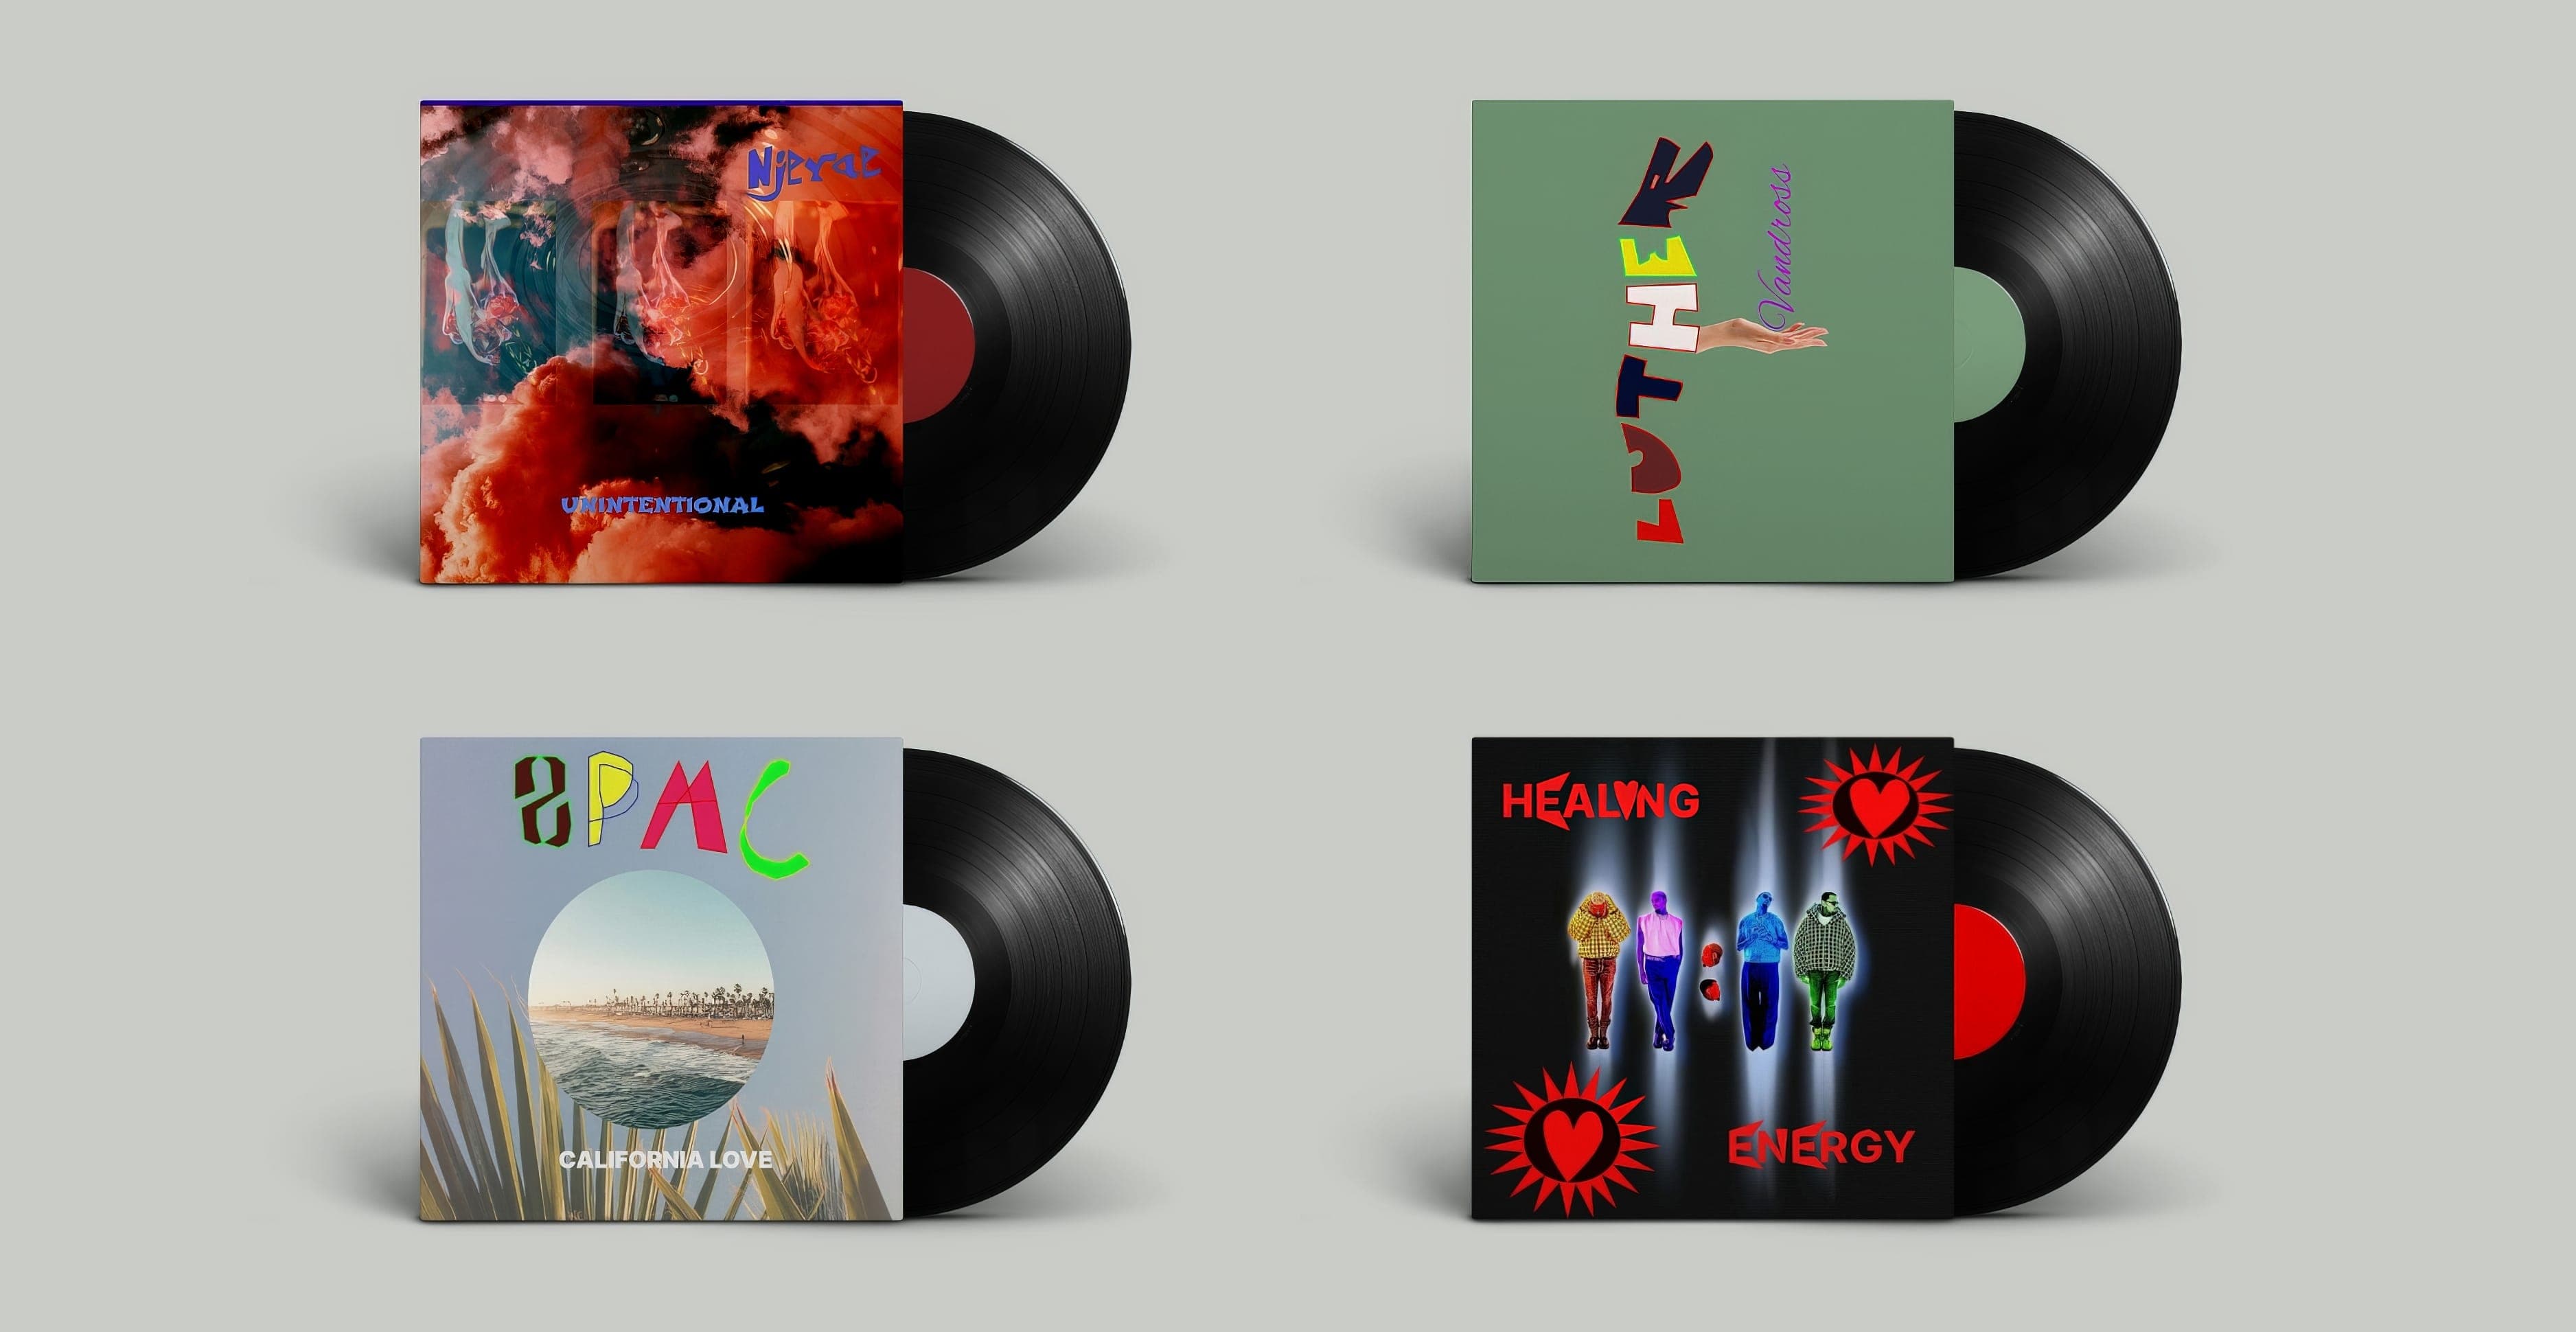 Four student-designed record sleeve covers created using Figma during a graphic design workshop in Kilifi, Kenya